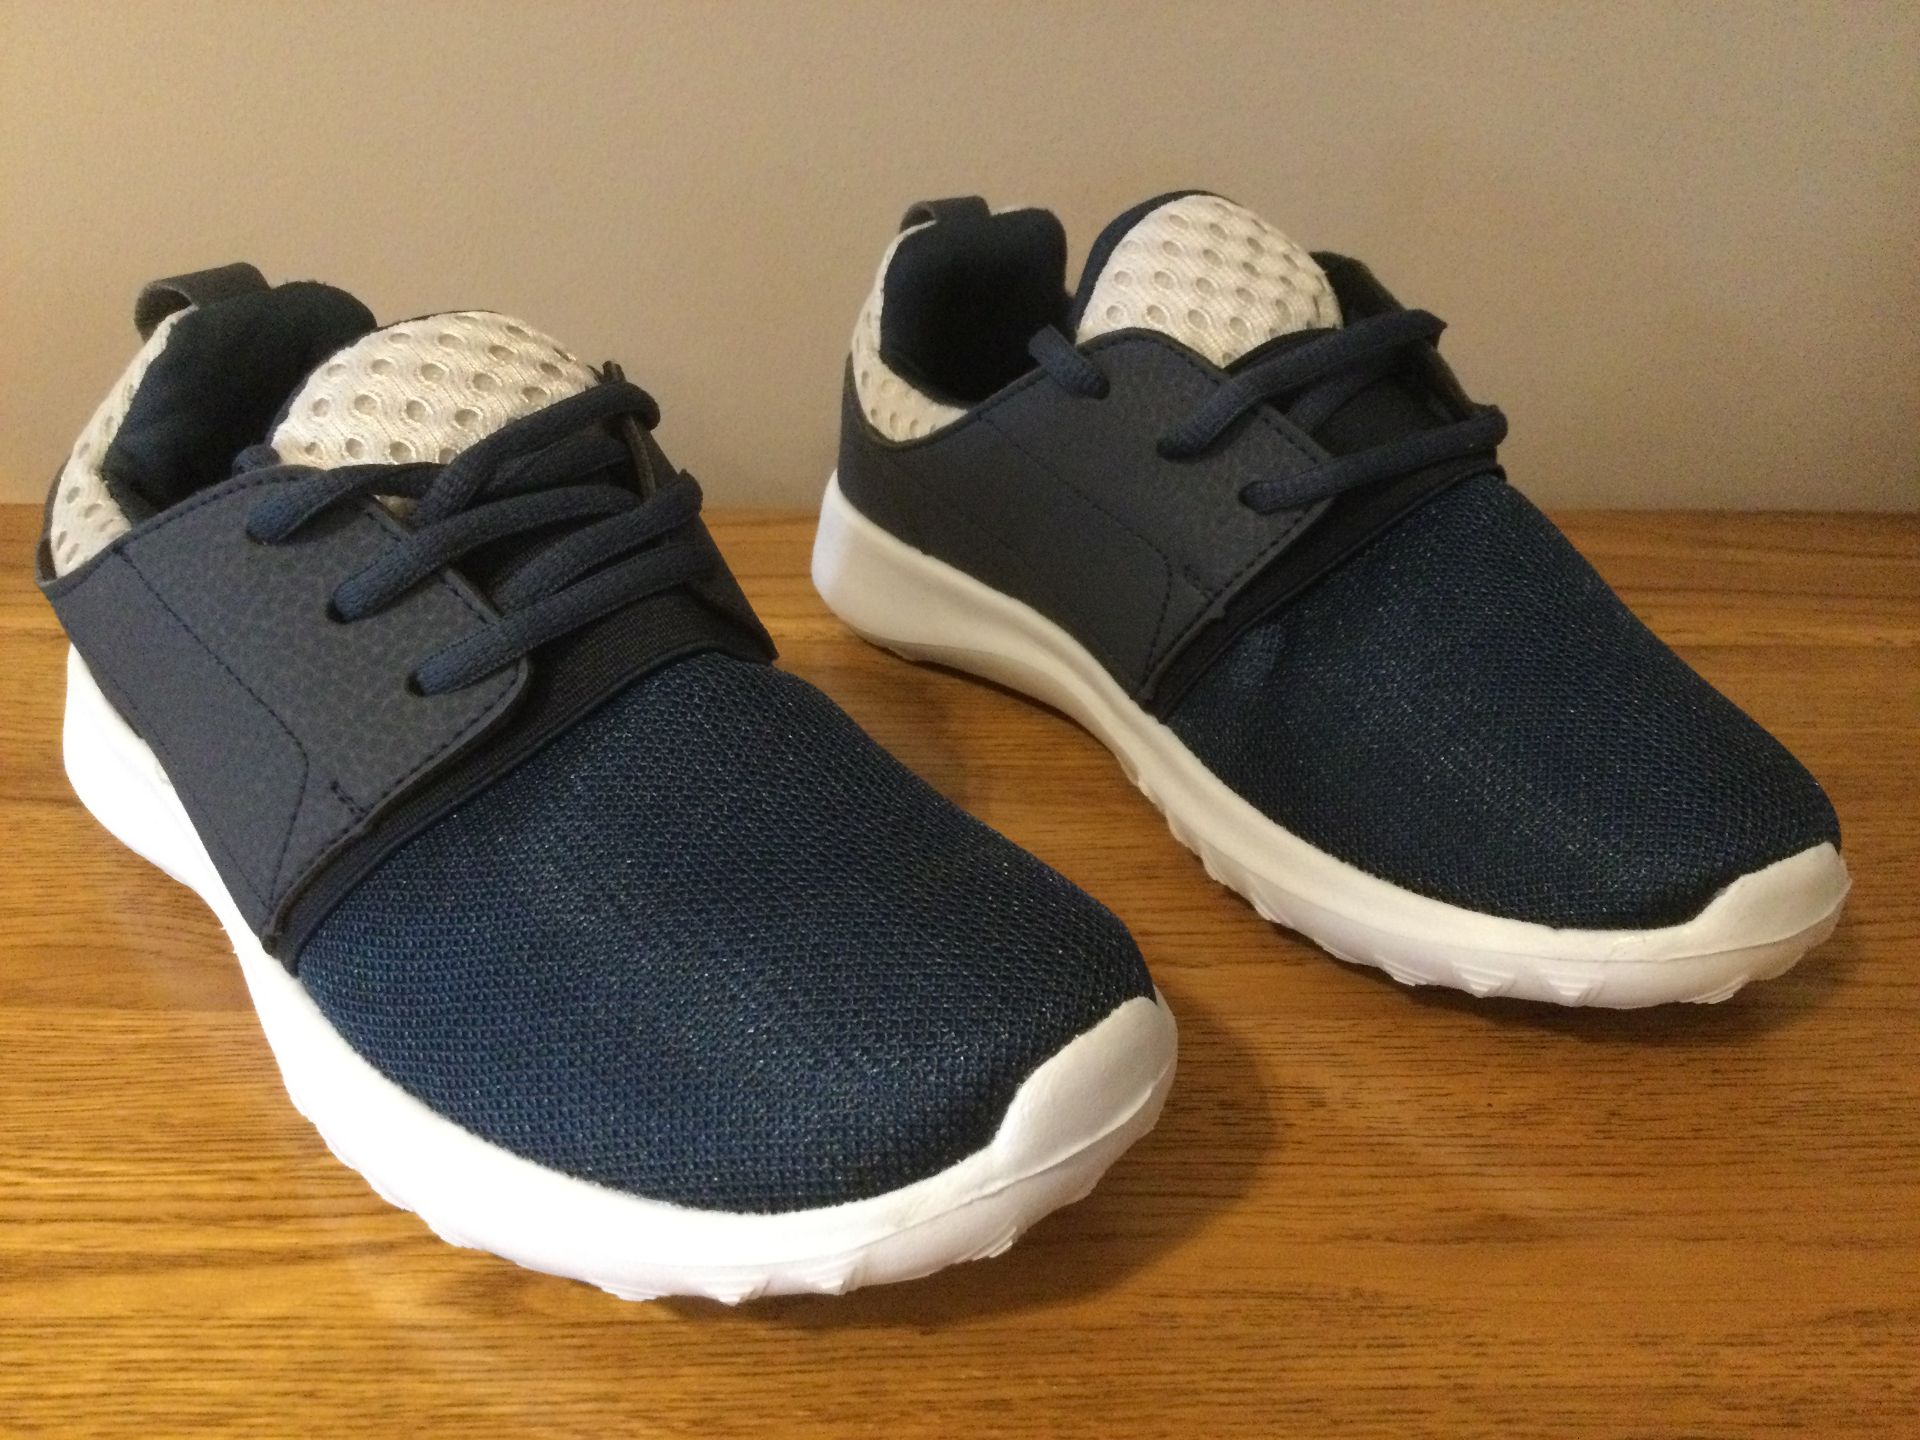 Dolcis “Rene” Women’s Memory Foam Trainers, Size 5, Navy - New RRP £28.99 - Image 2 of 5